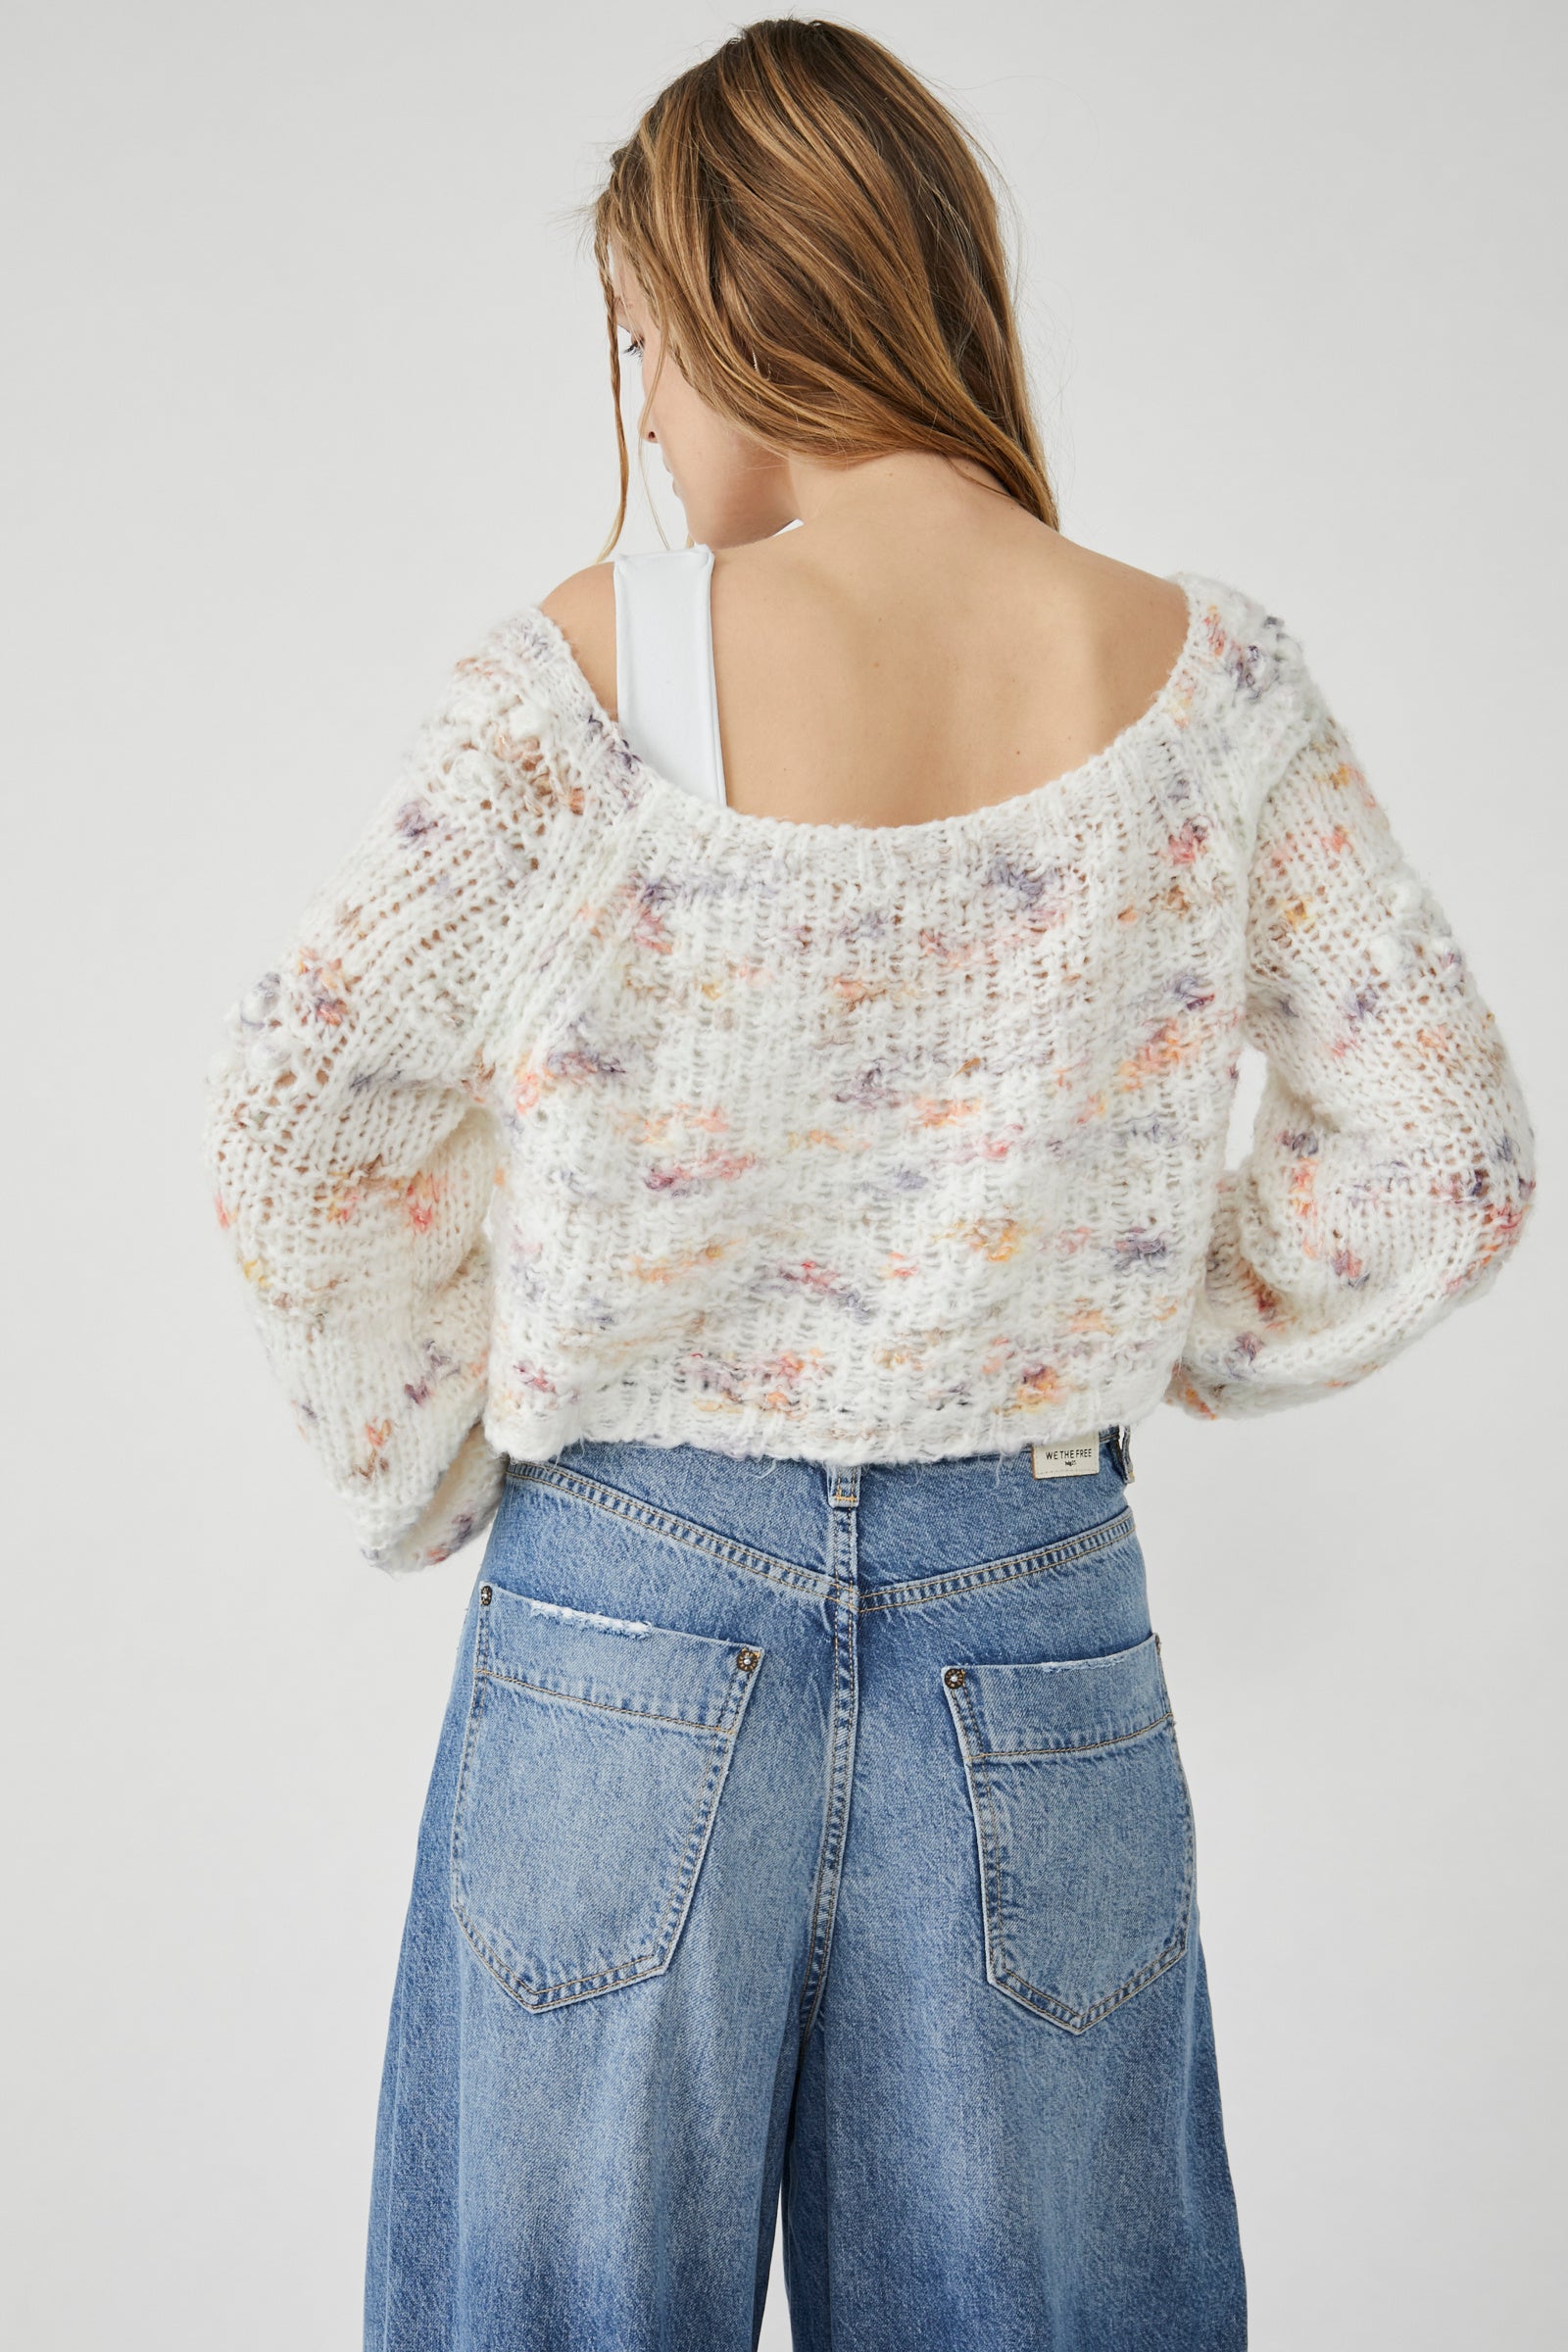 Sunset Cloud Pullover- Ivory Combo